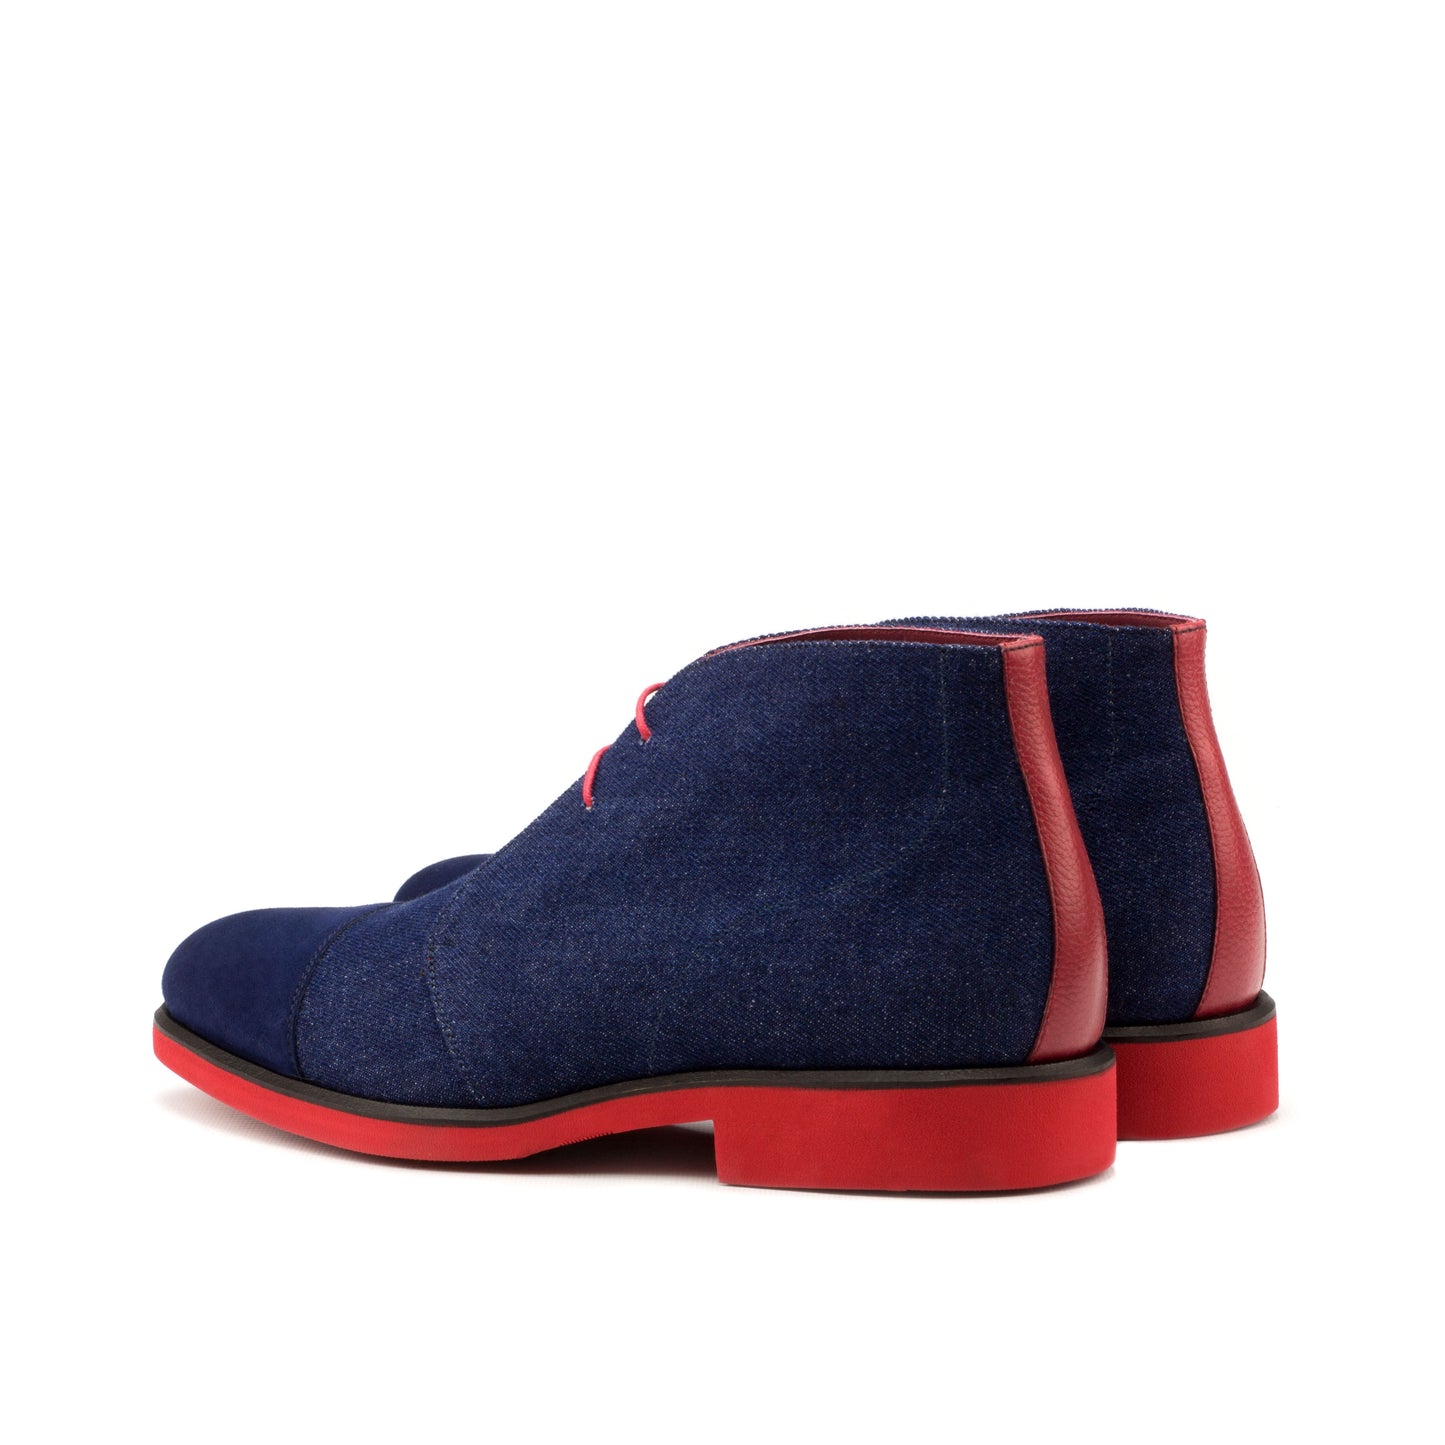 SUITCAFE Denim Jeans Navy Suede Red Sole Men's Chukka Boot